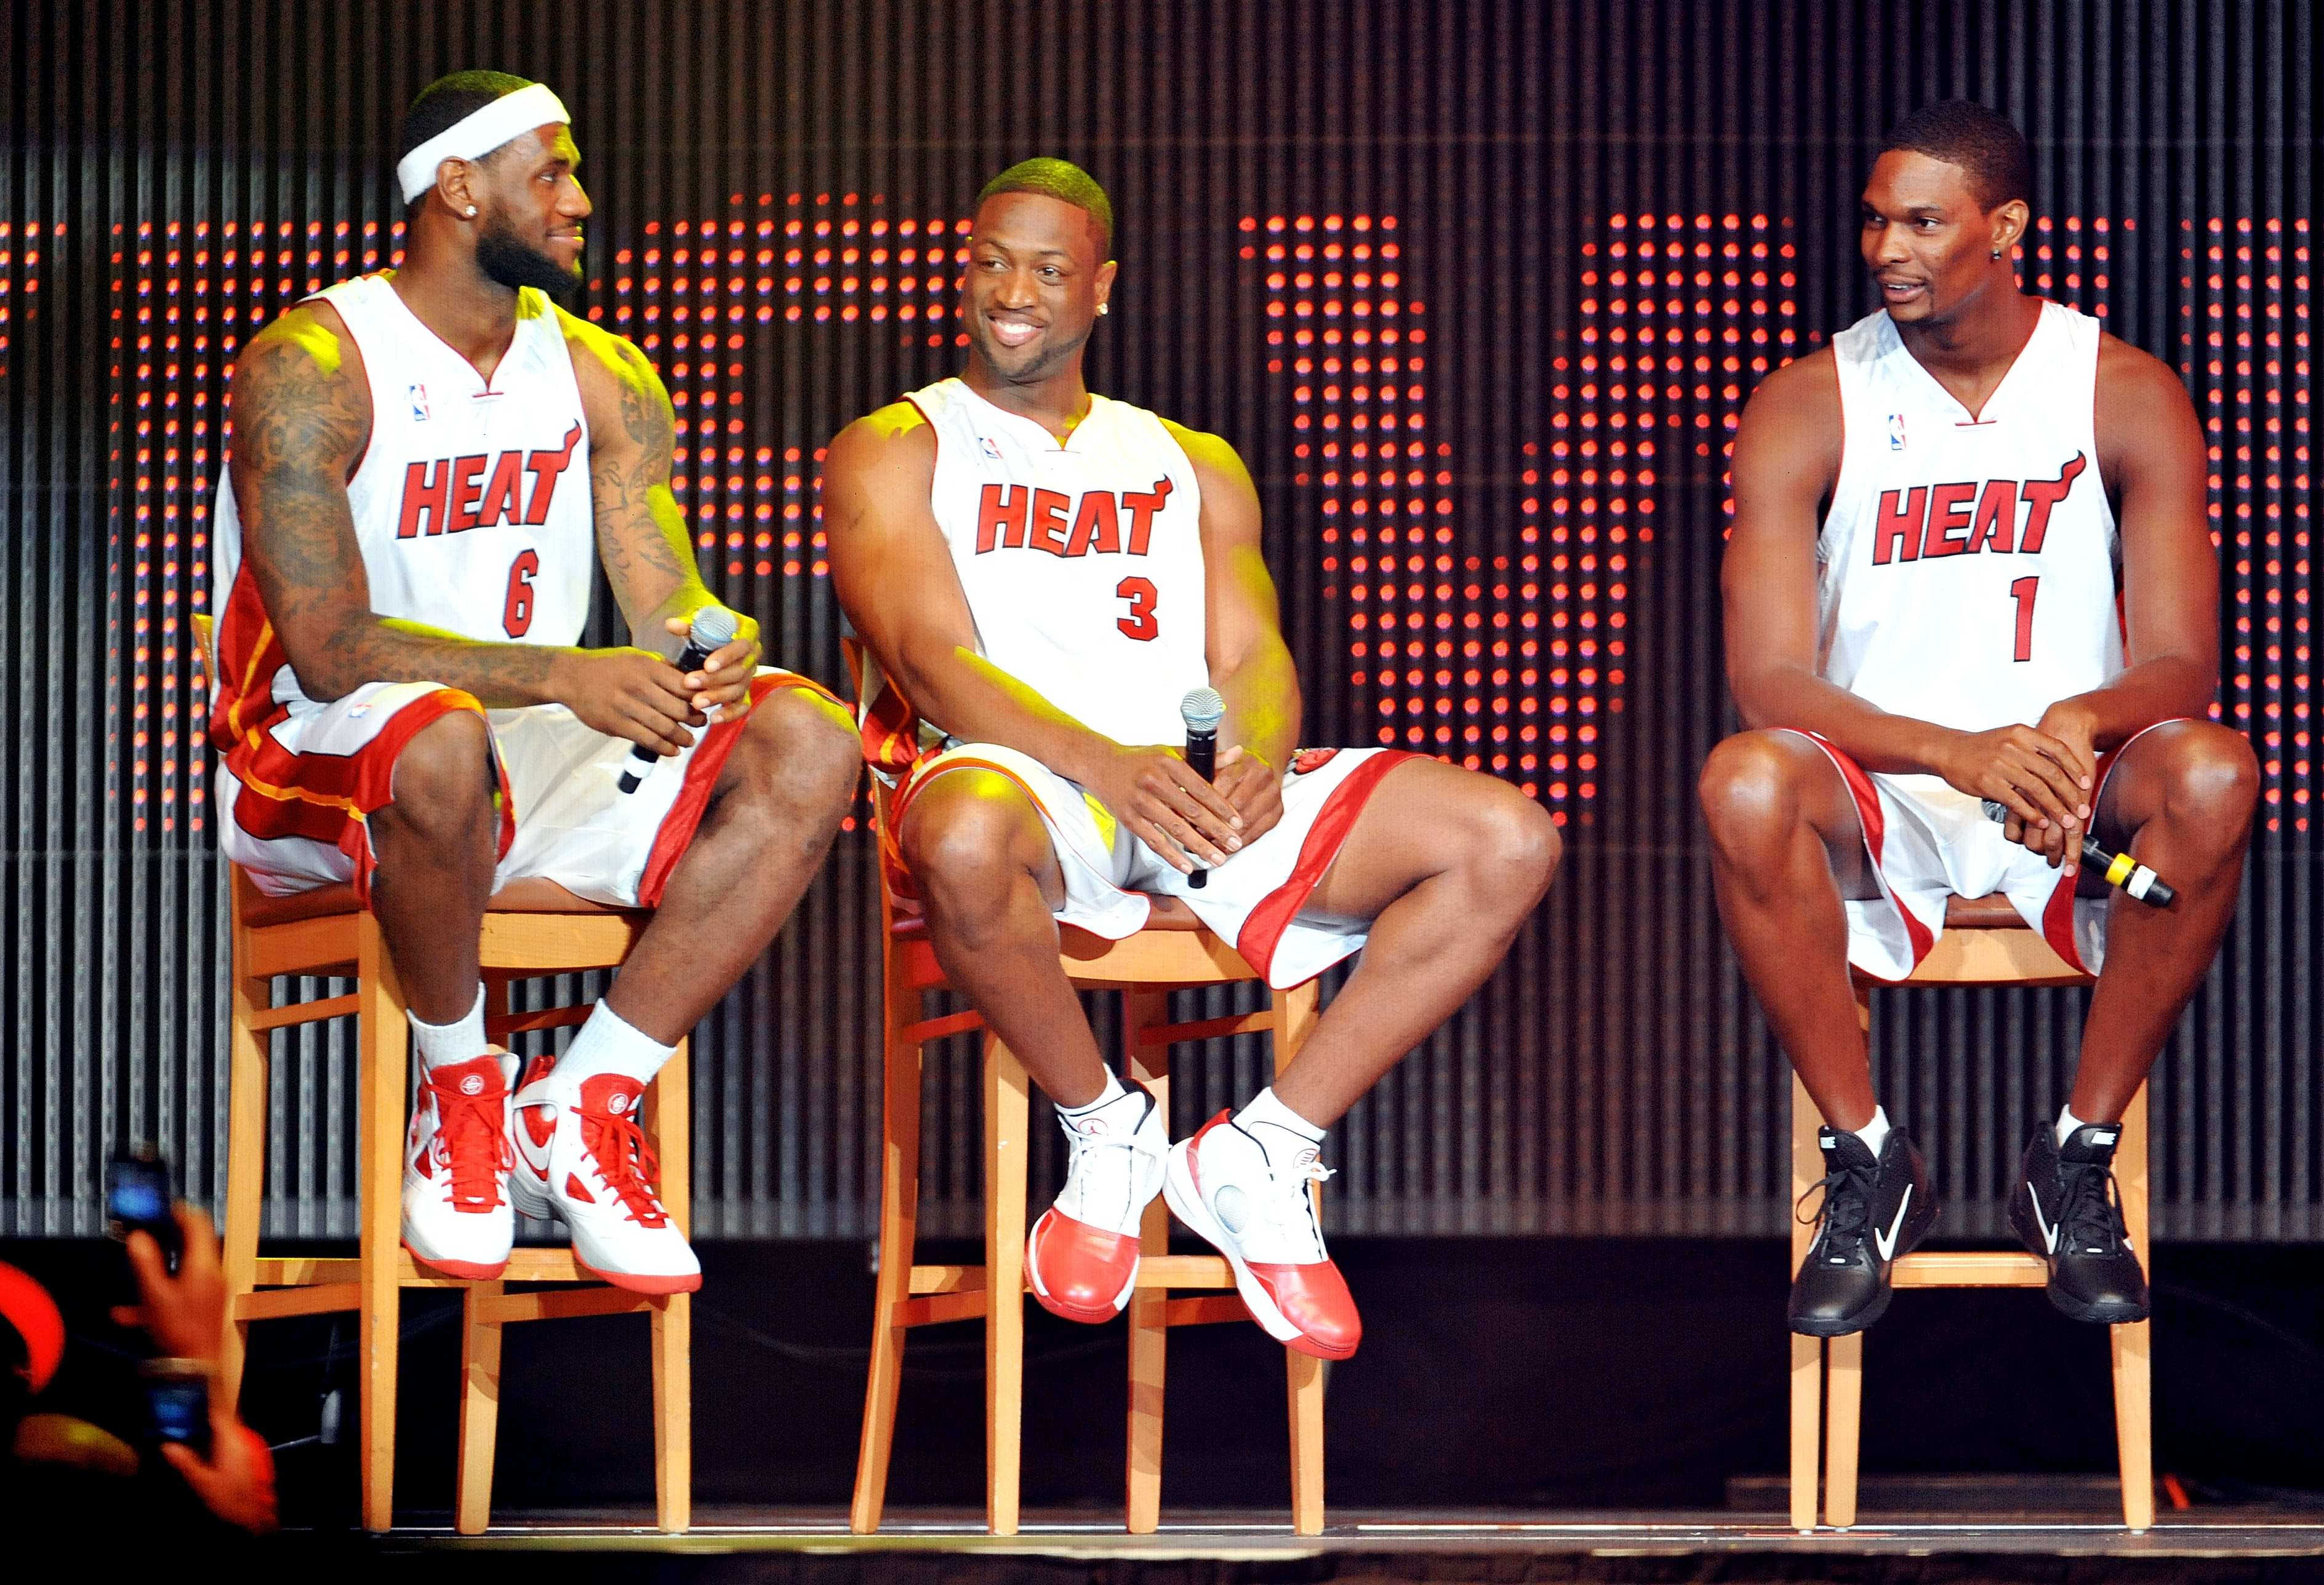 MIAMI - JULY 09:   LeBron James #6, Dwyane Wade #3 and Chris Bosh #1 of the Miami Heat speak after being introduced to fans during a welcome party at American Airlines Arena on July 9, 2010 in Miami, Florida.  (Photo by Doug Benc/Getty Images)